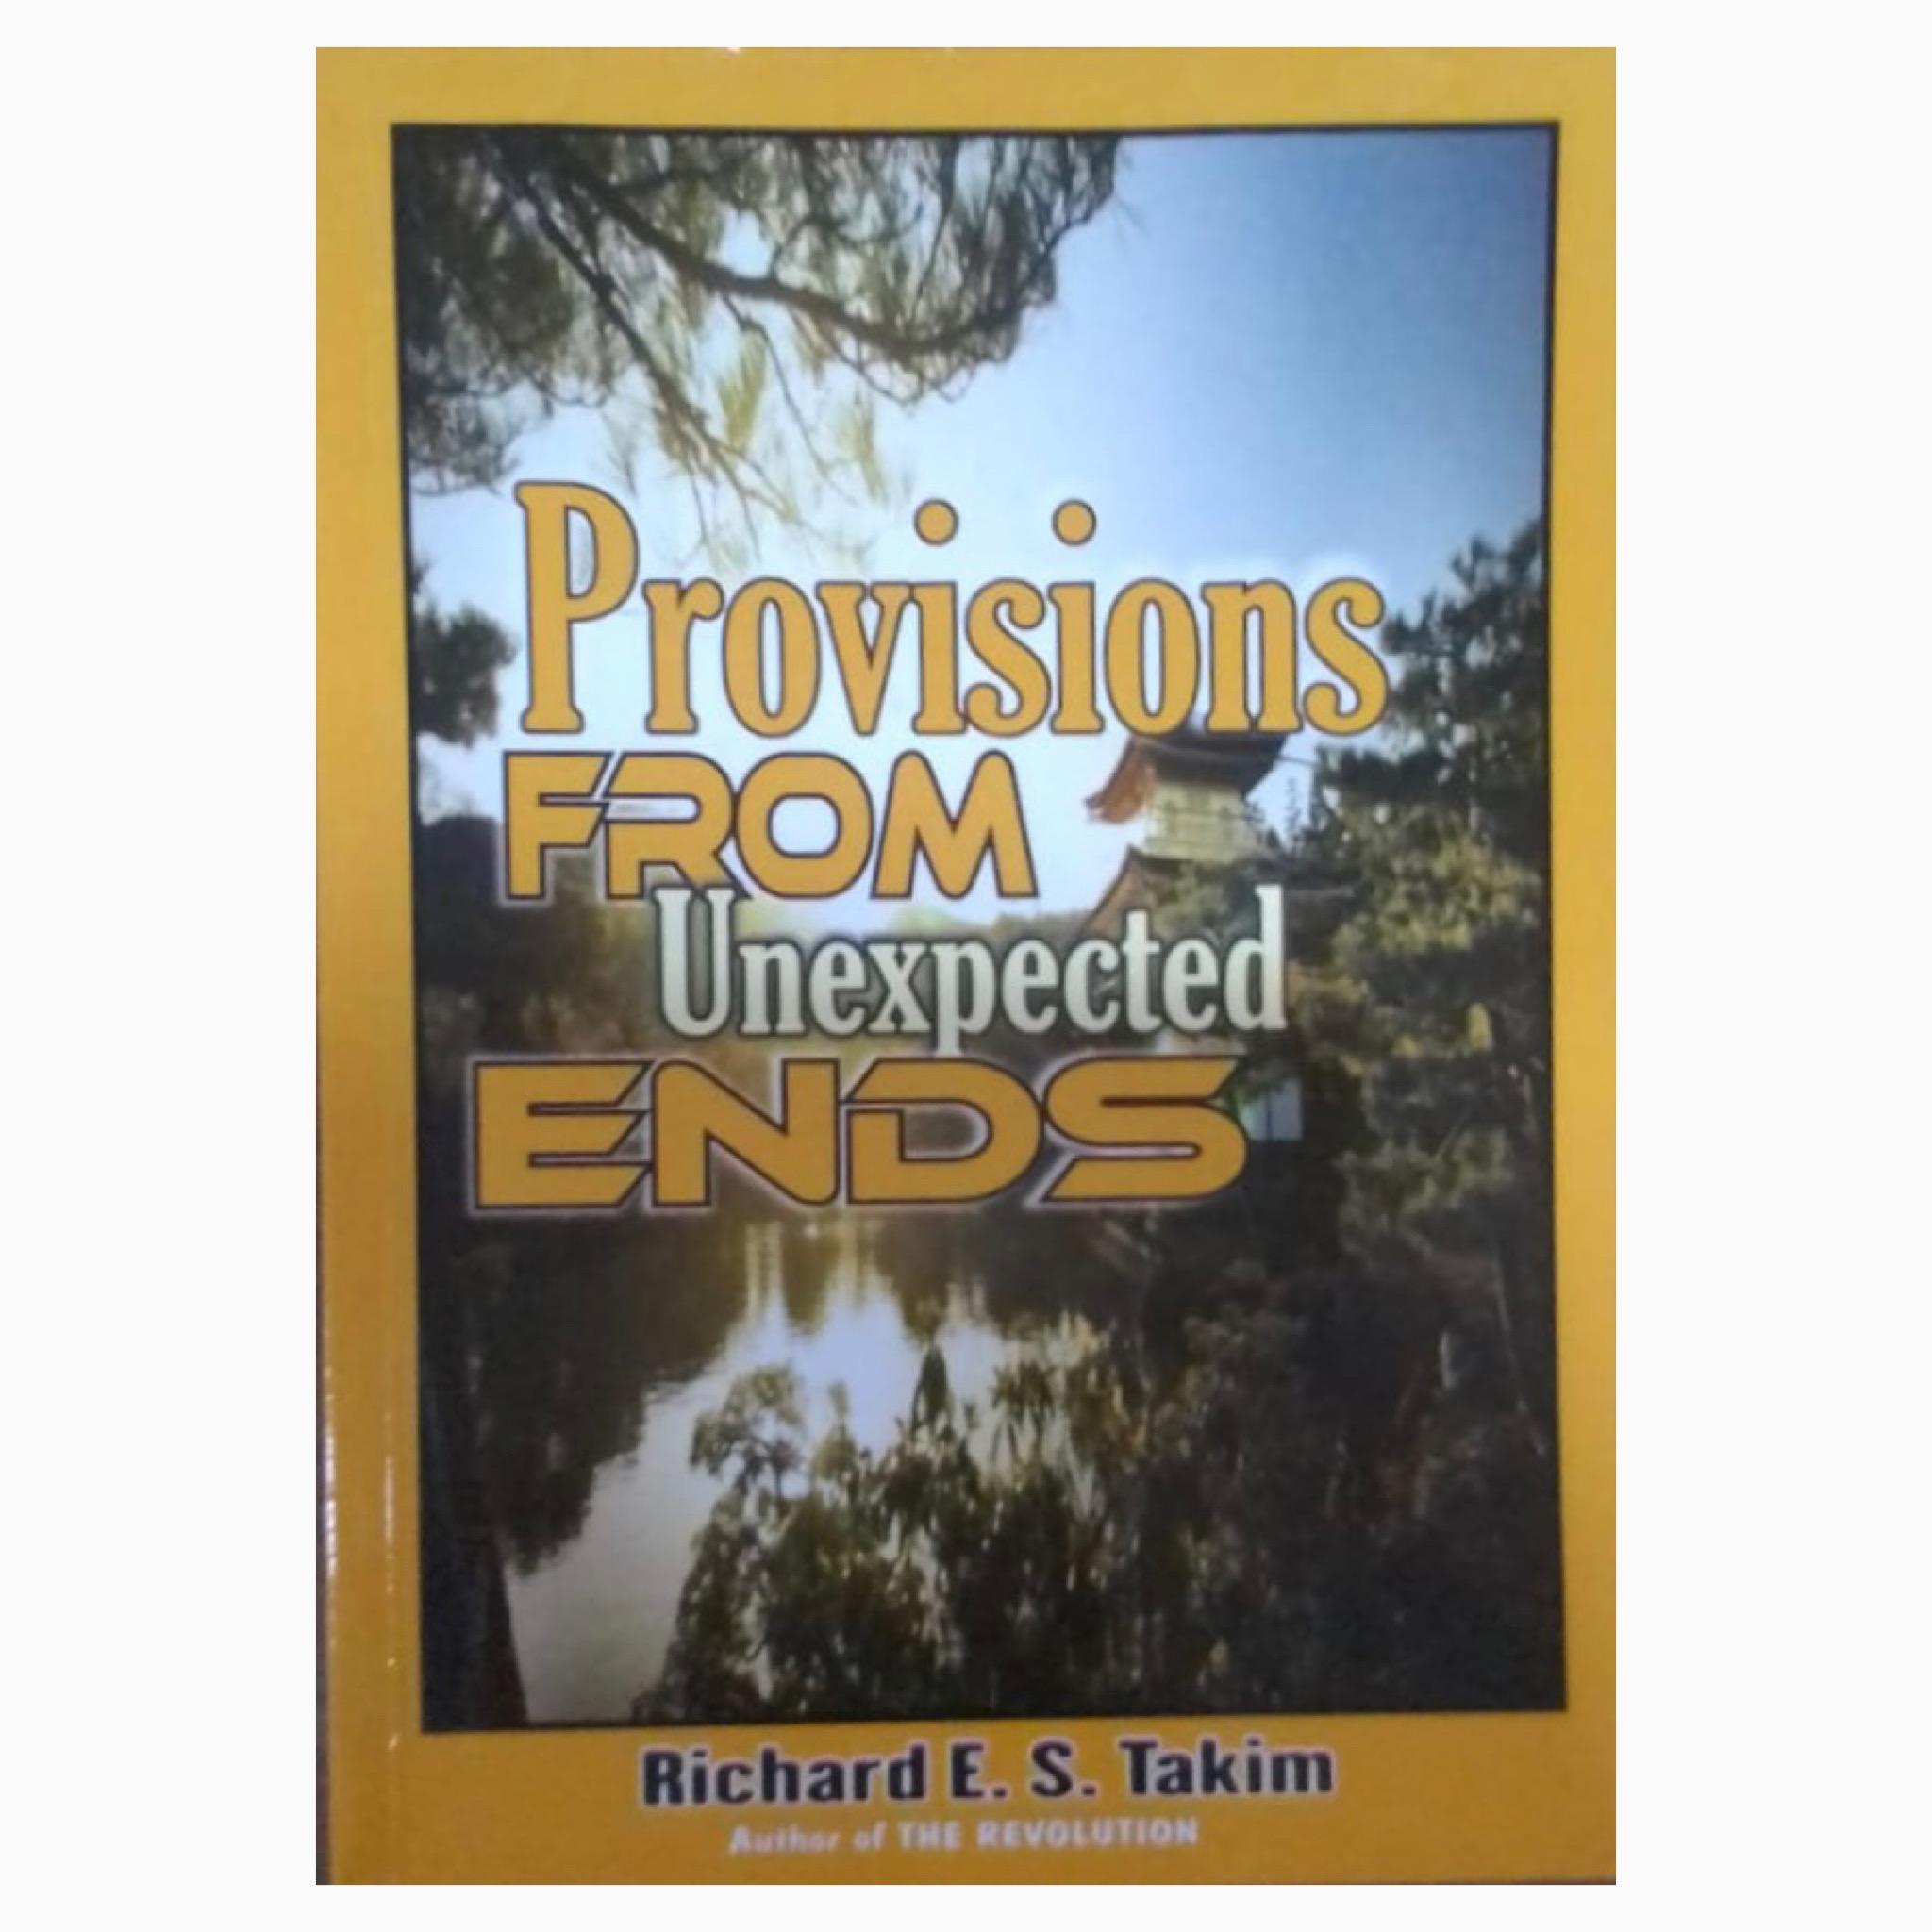 Provisions from unexpected ends book by apostle Richard E S Takim